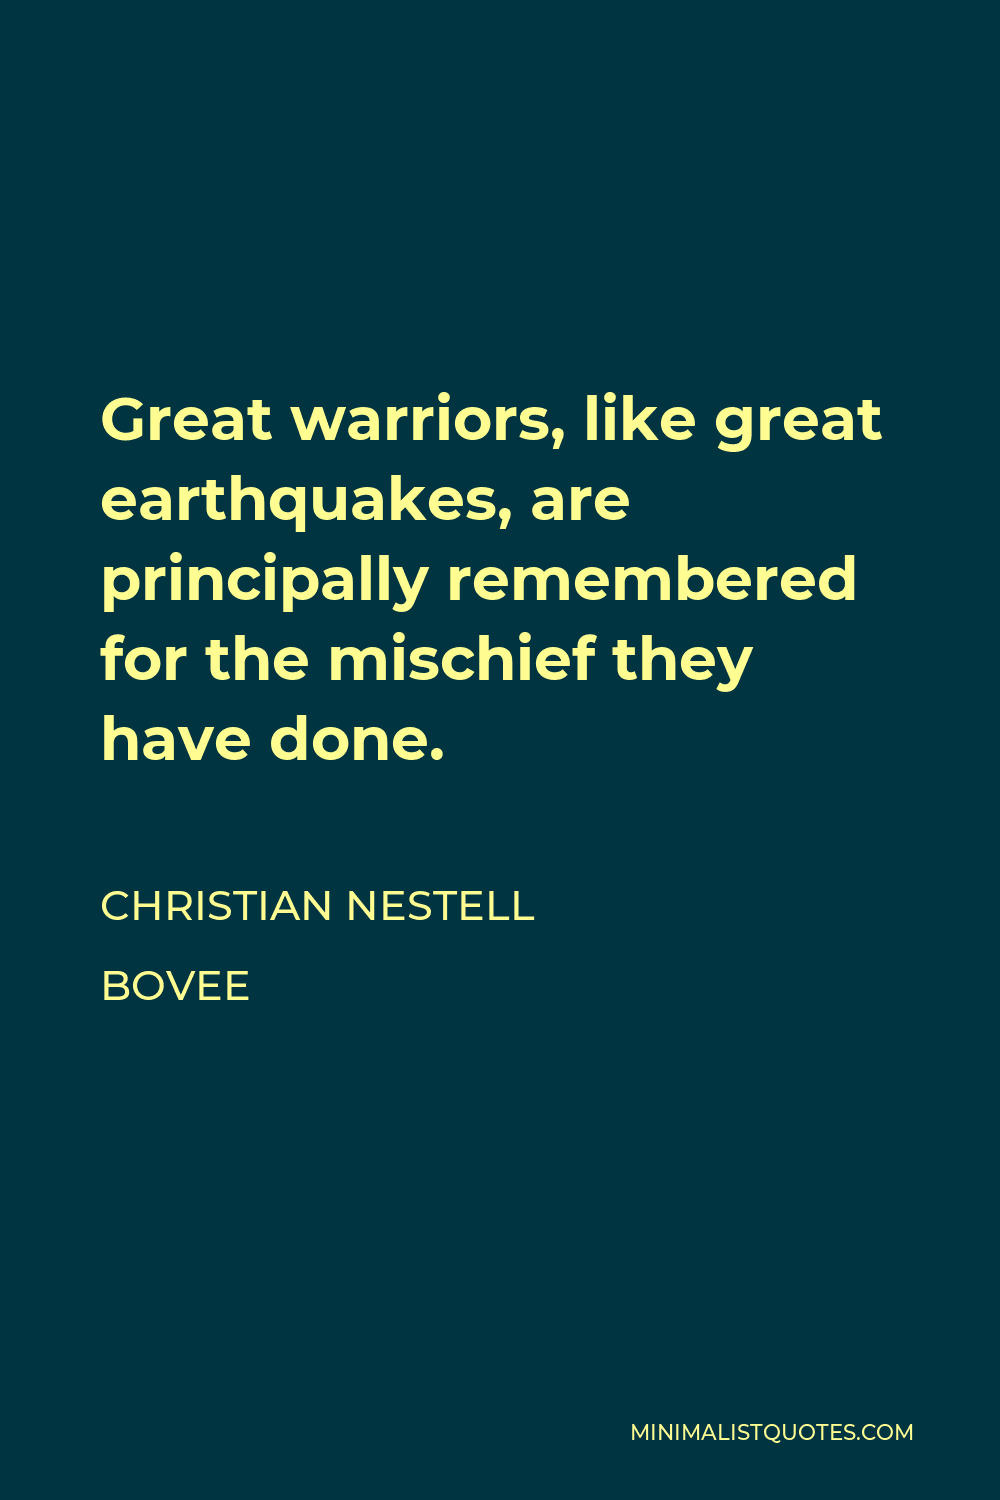 Christian Nestell Bovee Quote - Great warriors, like great earthquakes, are principally remembered for the mischief they have done.